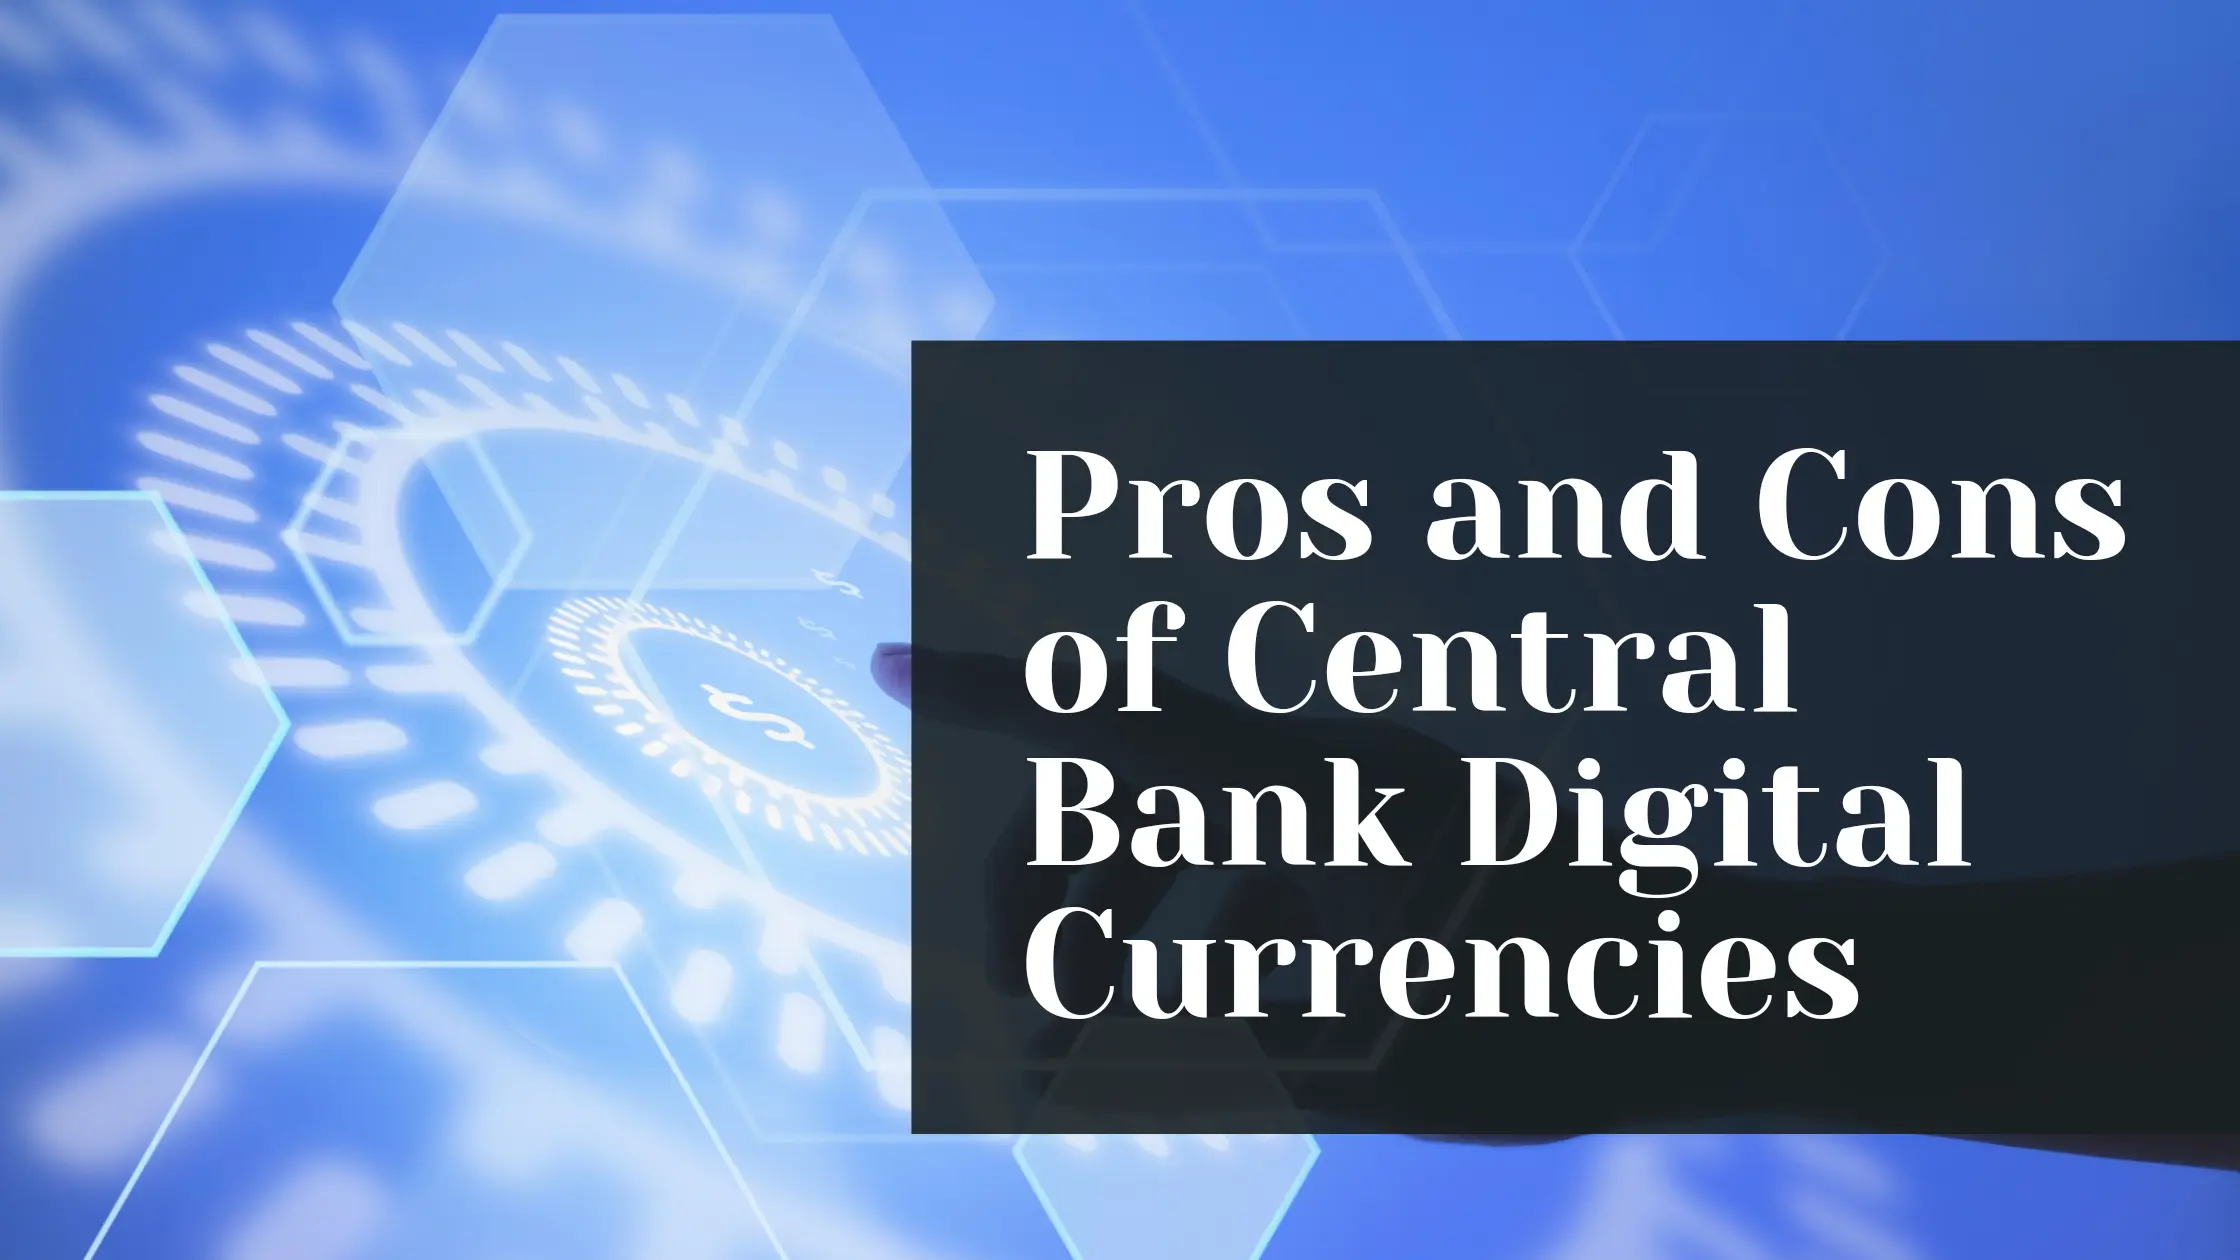 Pros and Cons of Central Bank Digital Currencies (CBDCs)